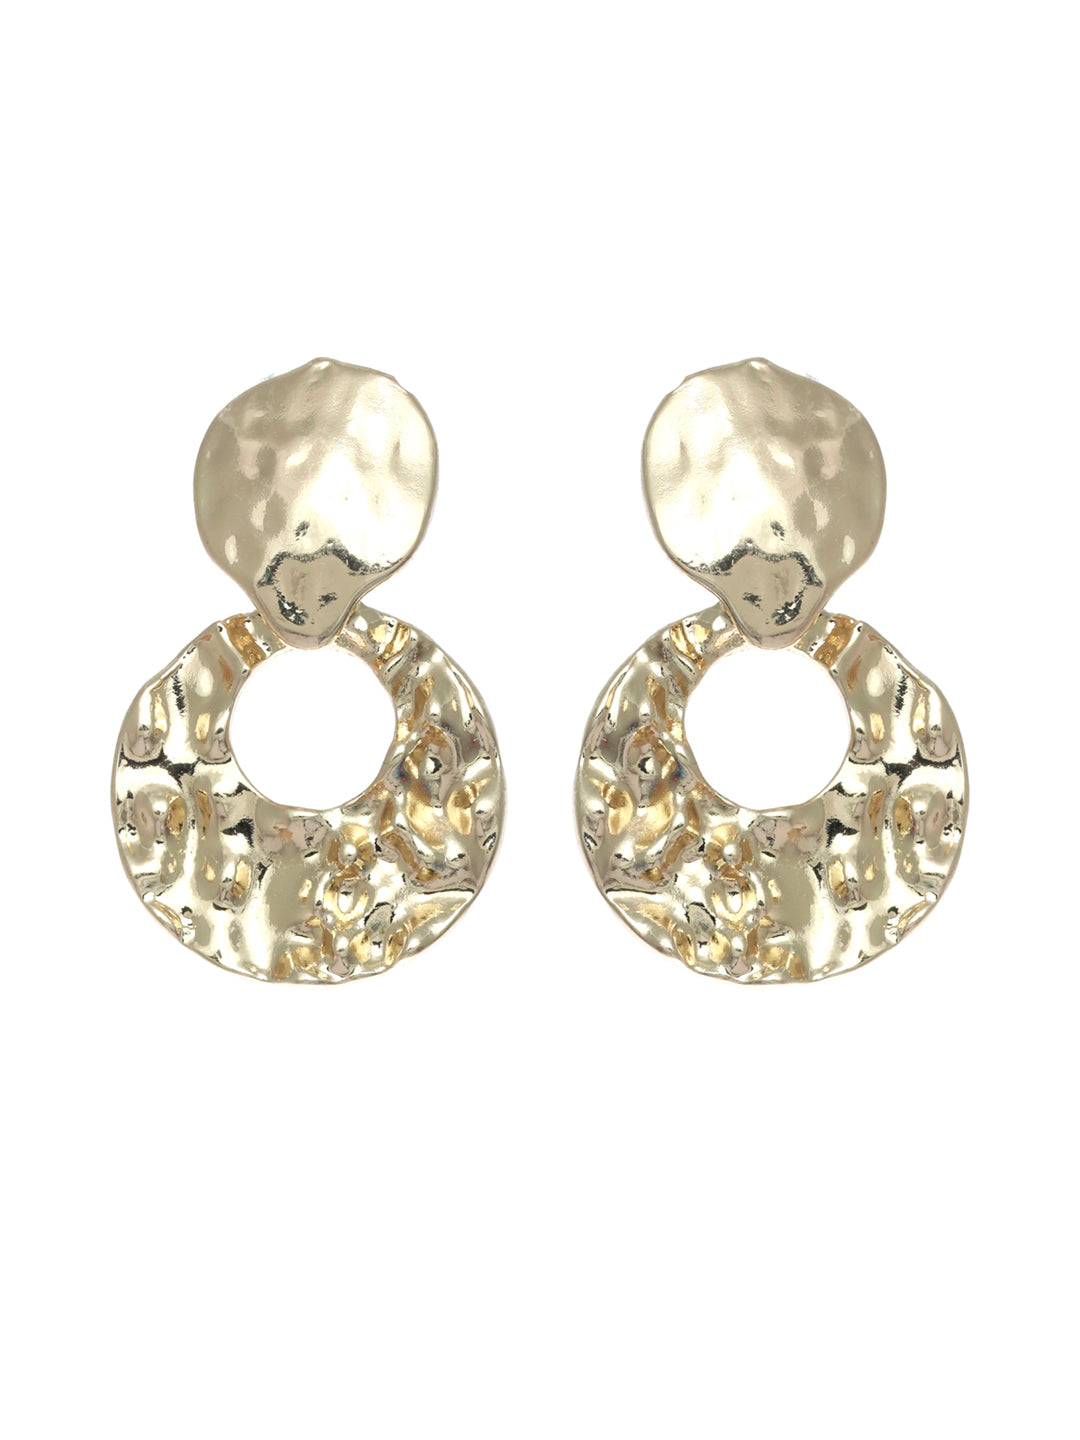 Prita Gold Plated Hammered Drop Earrings